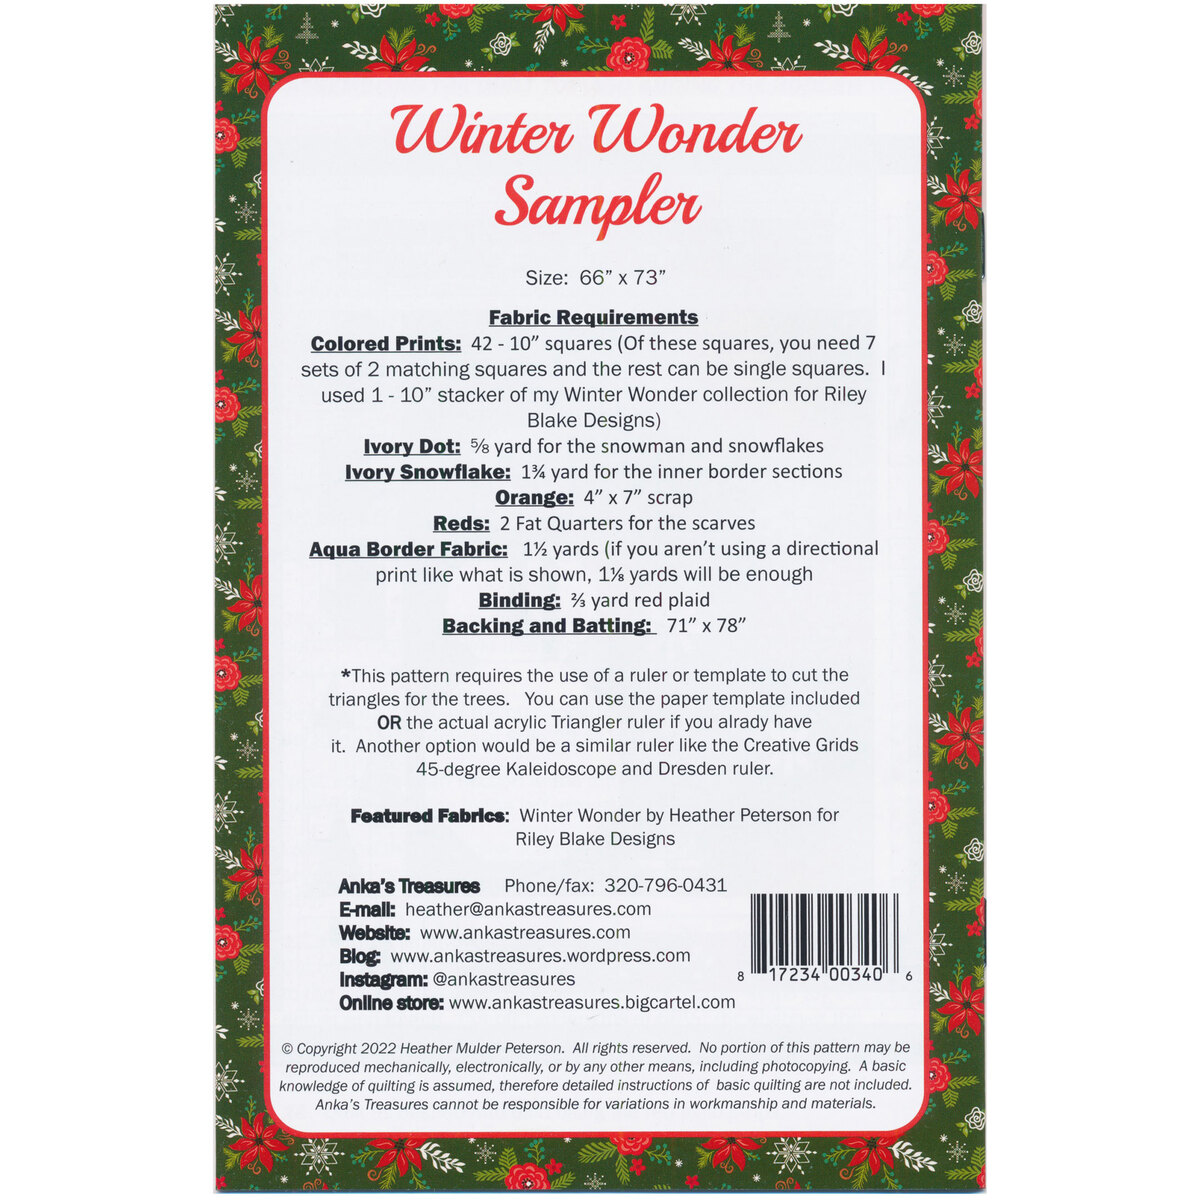 Clover Wonder Clips - Assorted Colors - 10ct